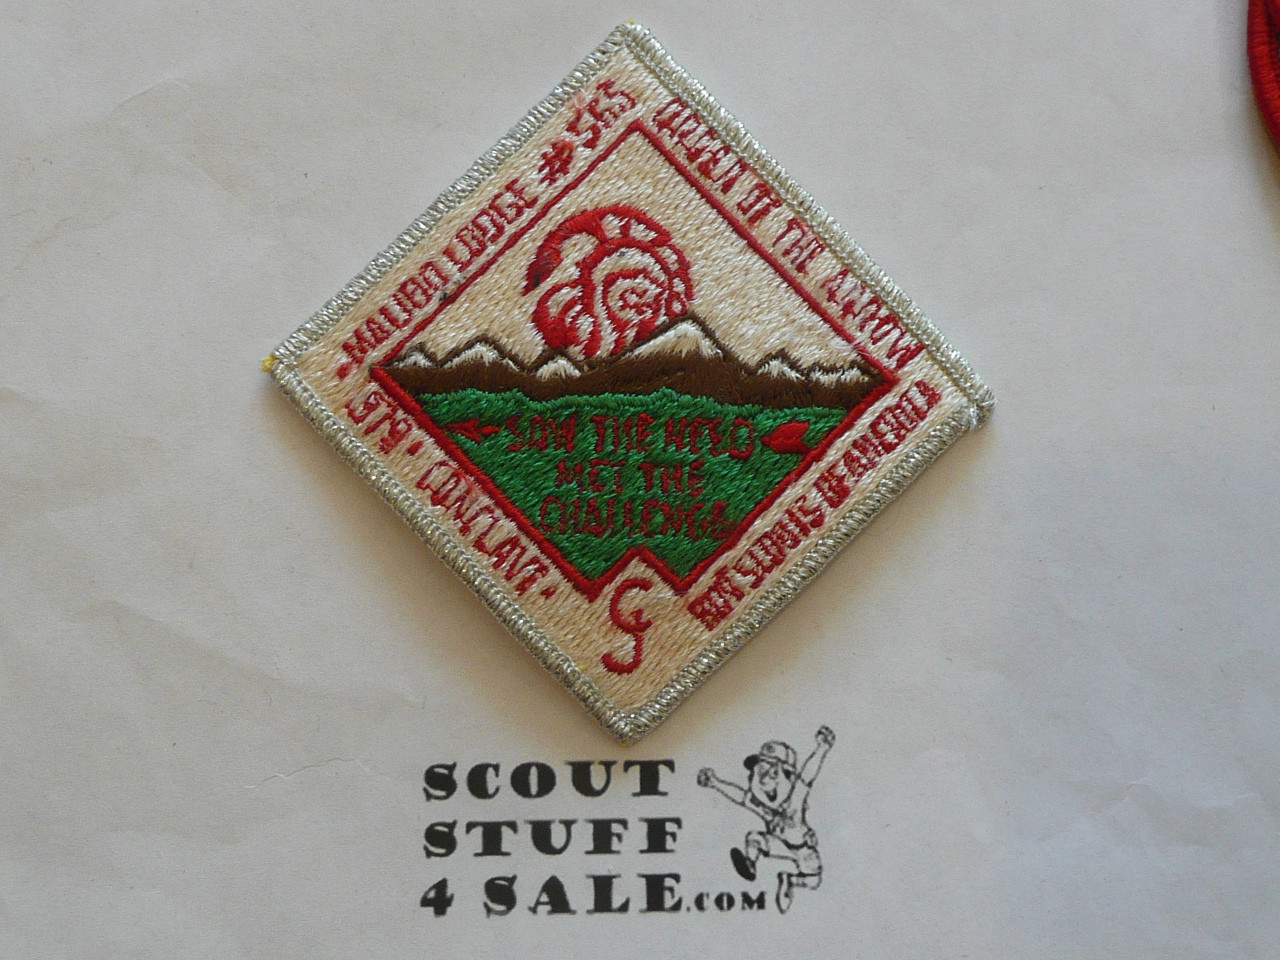 Order of the Arrow Lodge #566 Malibu 1979 Conclave Patch, silver mylar bdr - Scout